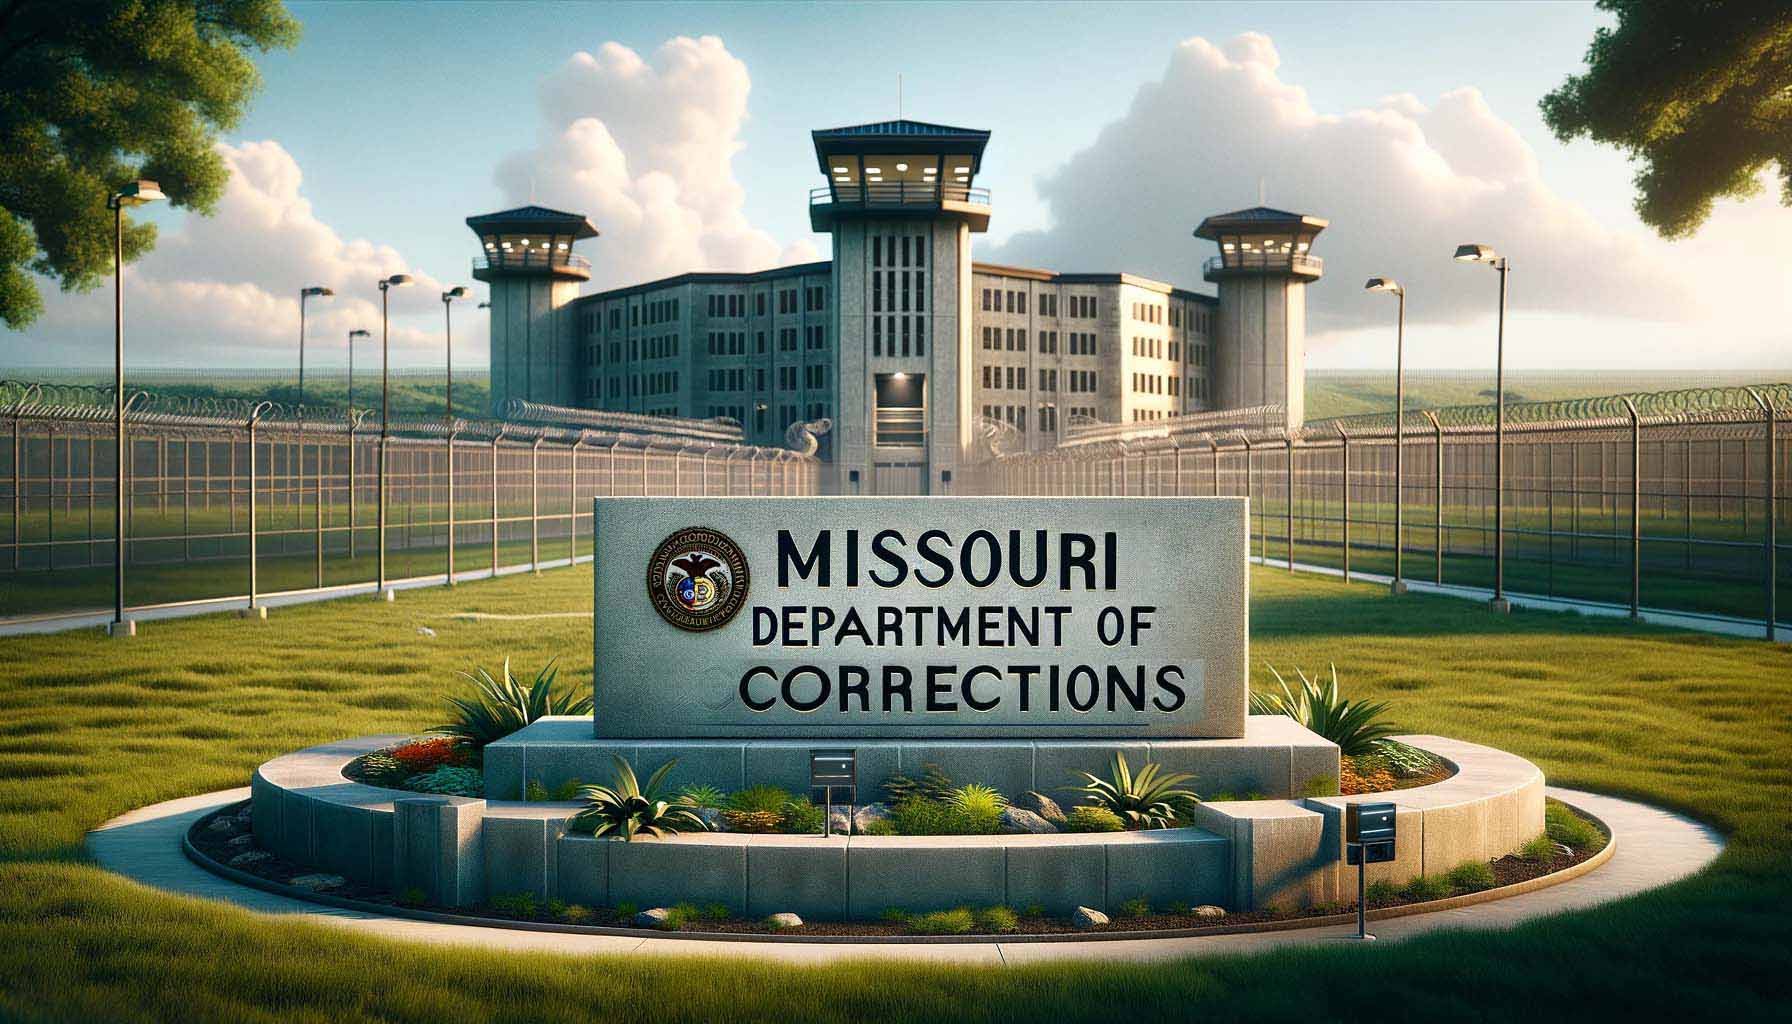 Missouri Department of Corrections news Graphic V2